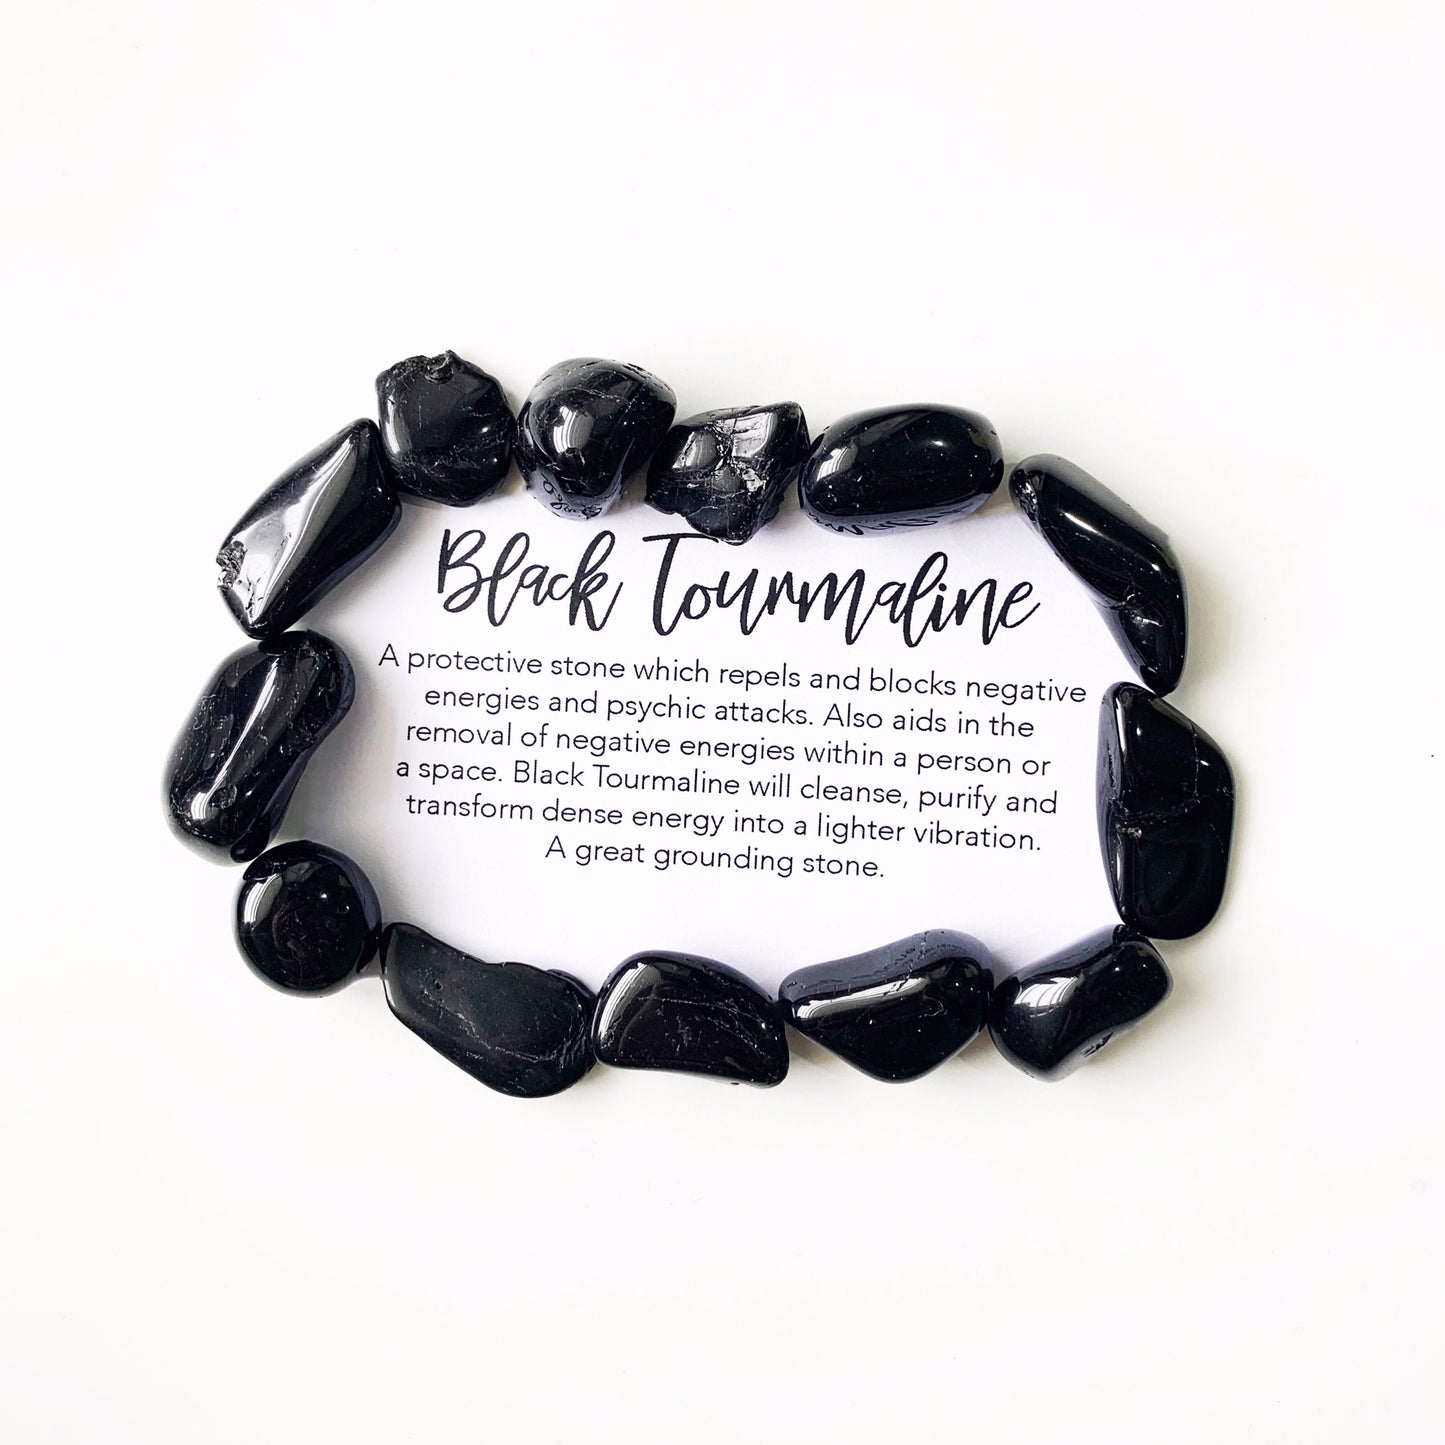 Black Tourmaline is a protective stone which repels and blocks negative energies and psychic attack. Black Tourmaline also aids in the removal of negative energies within a person or a space. Black Tourmaline will cleanse, purify, and transform dense energy into a lighter vibration